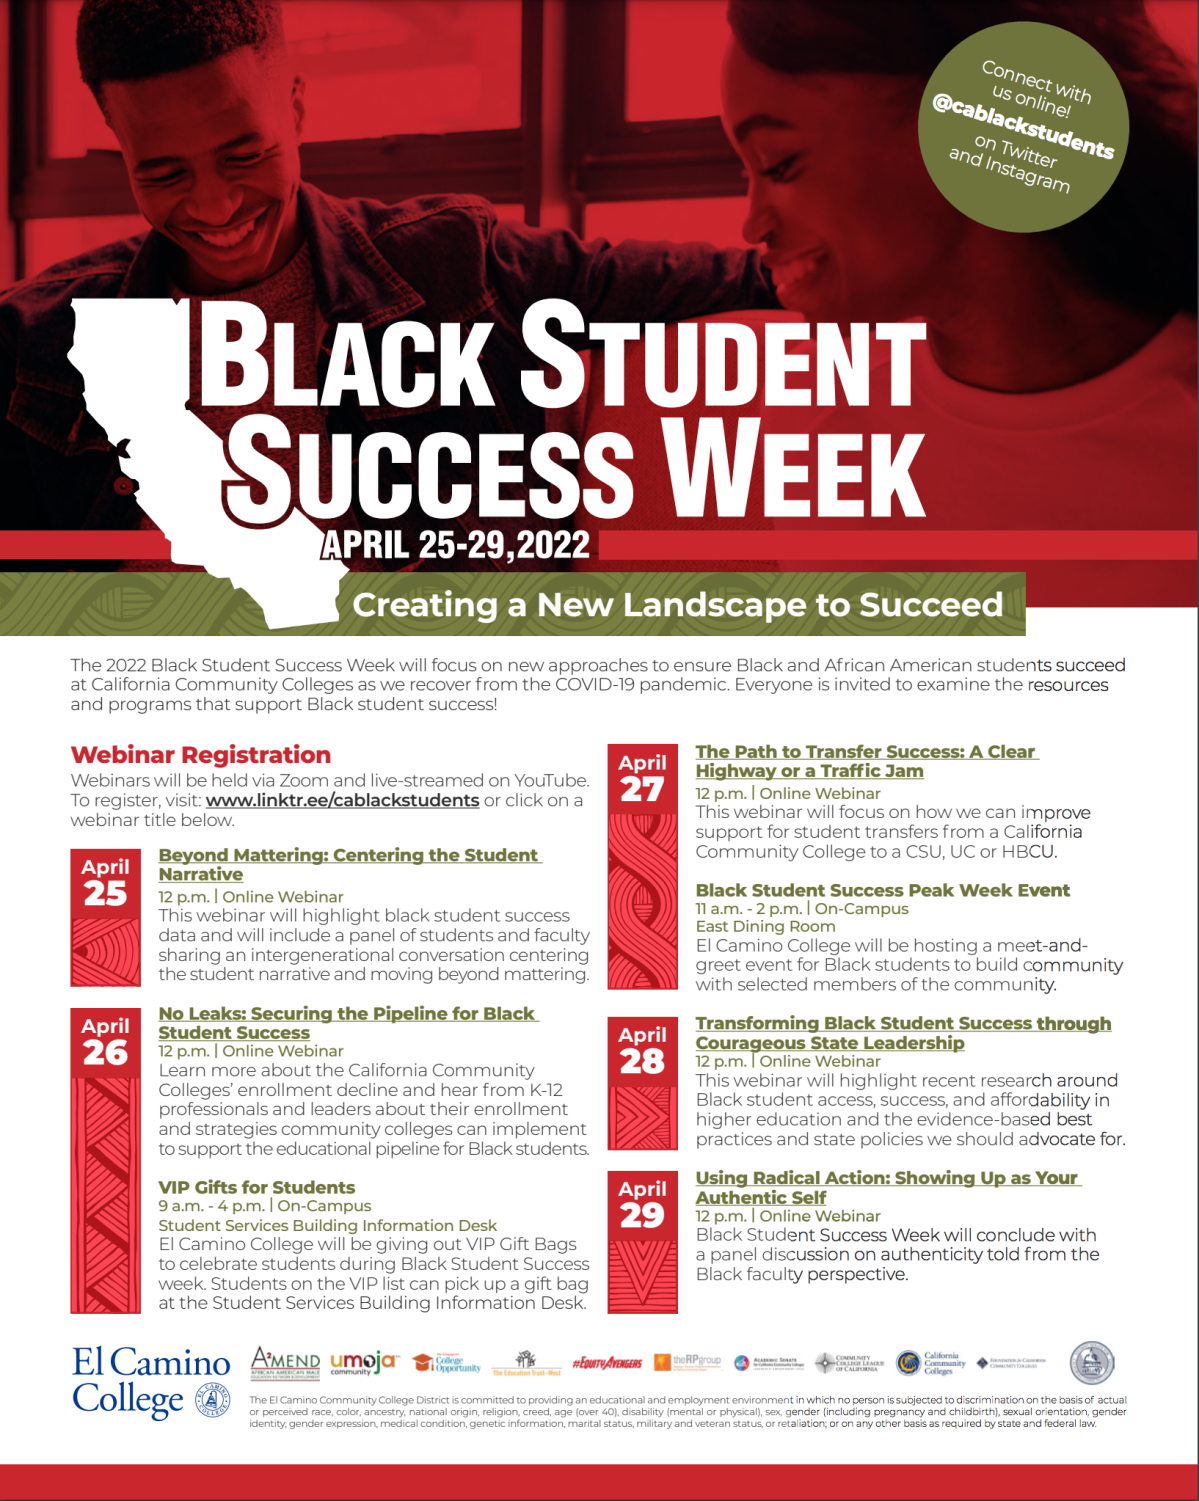 El Camino holds inperson event during statewide Black Student Success